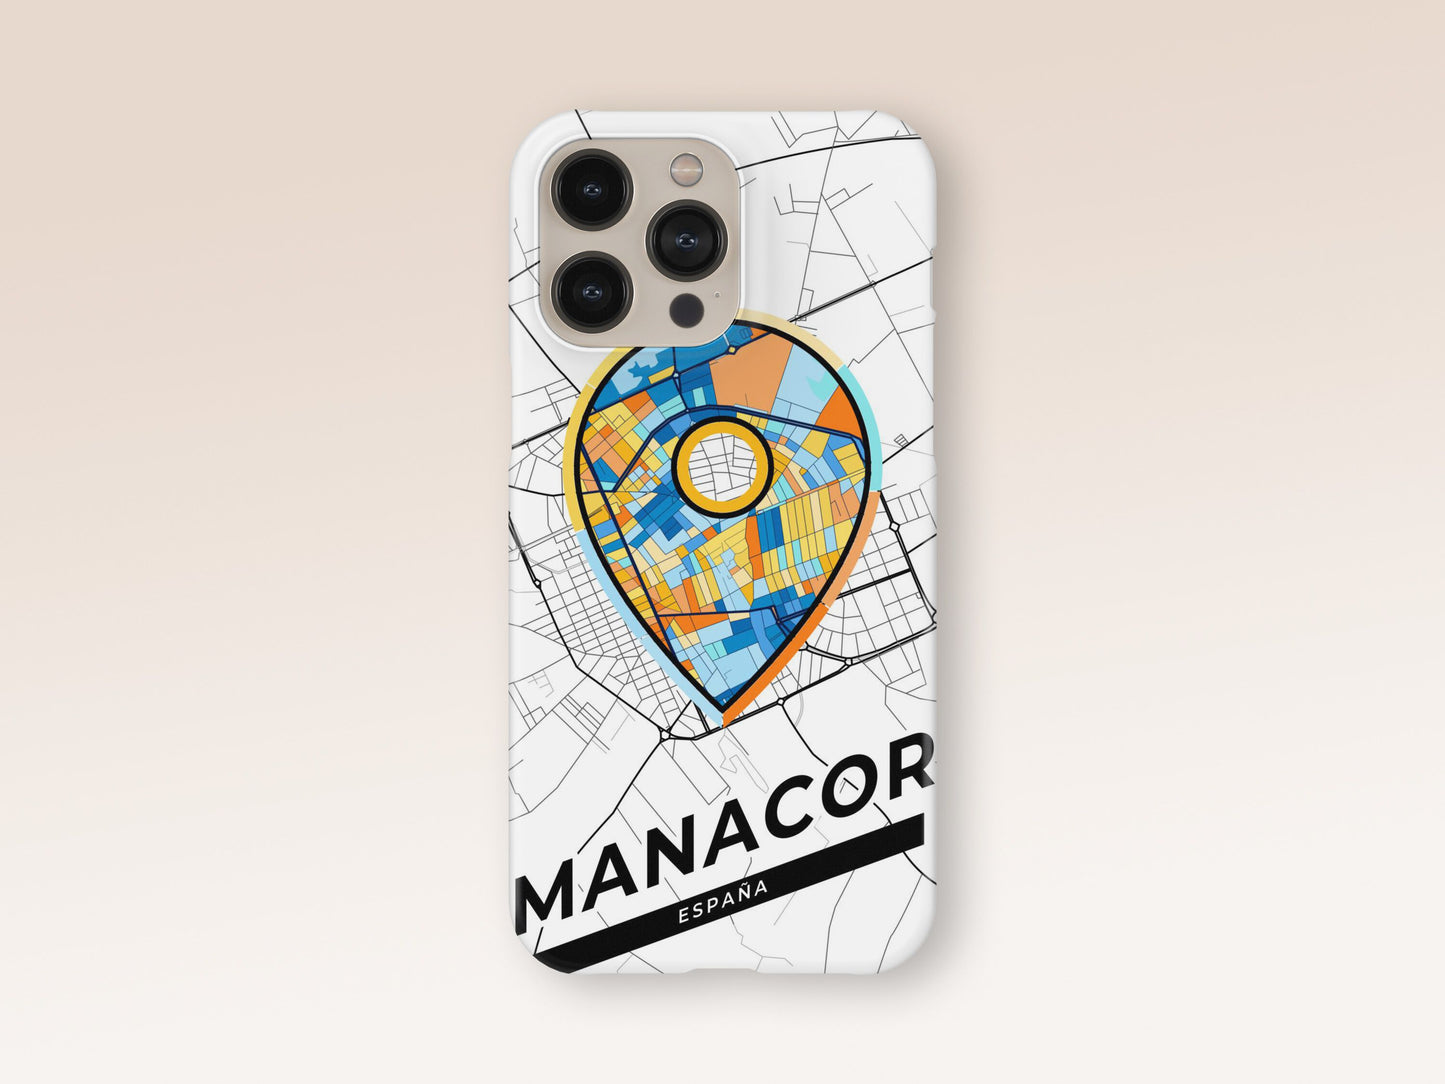 Manacor Spain slim phone case with colorful icon. Birthday, wedding or housewarming gift. Couple match cases. 1